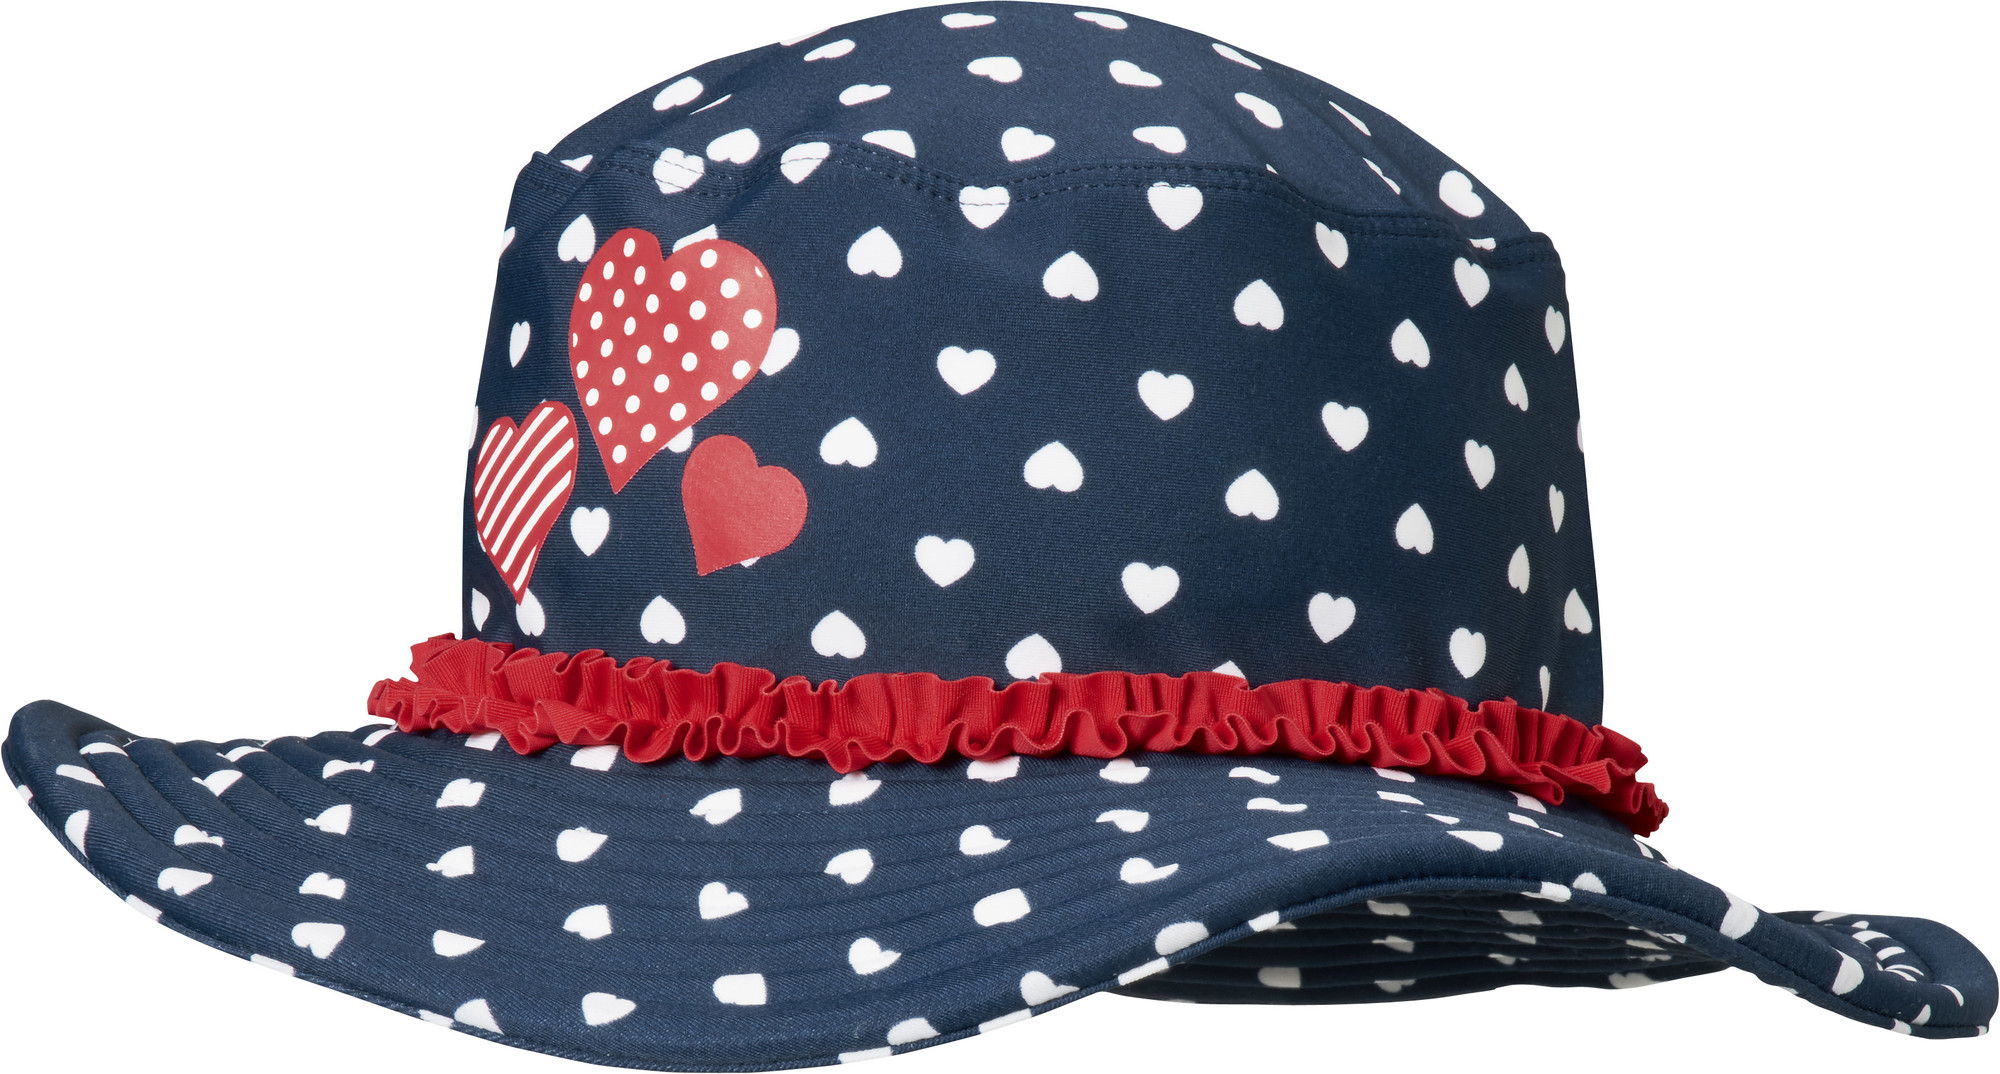 Playshoes - UV sun hat for girls - hearts - blue